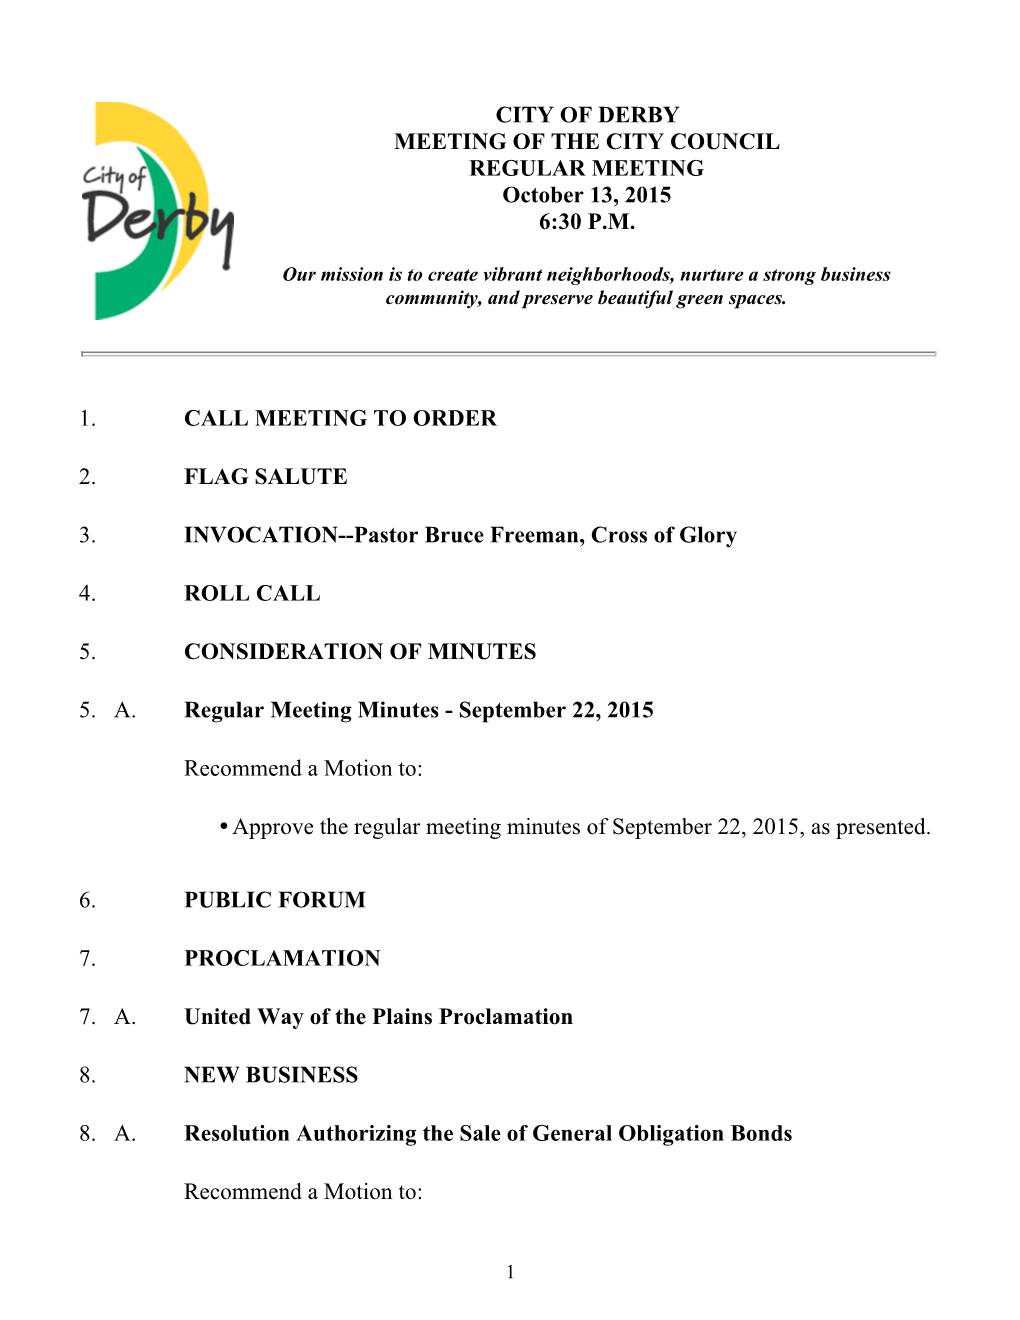 CITY of DERBY MEETING of the CITY COUNCIL REGULAR MEETING October 13, 2015 6:30 P.M. 1. CALL MEETING to ORDER 2. FLAG SALUTE 3